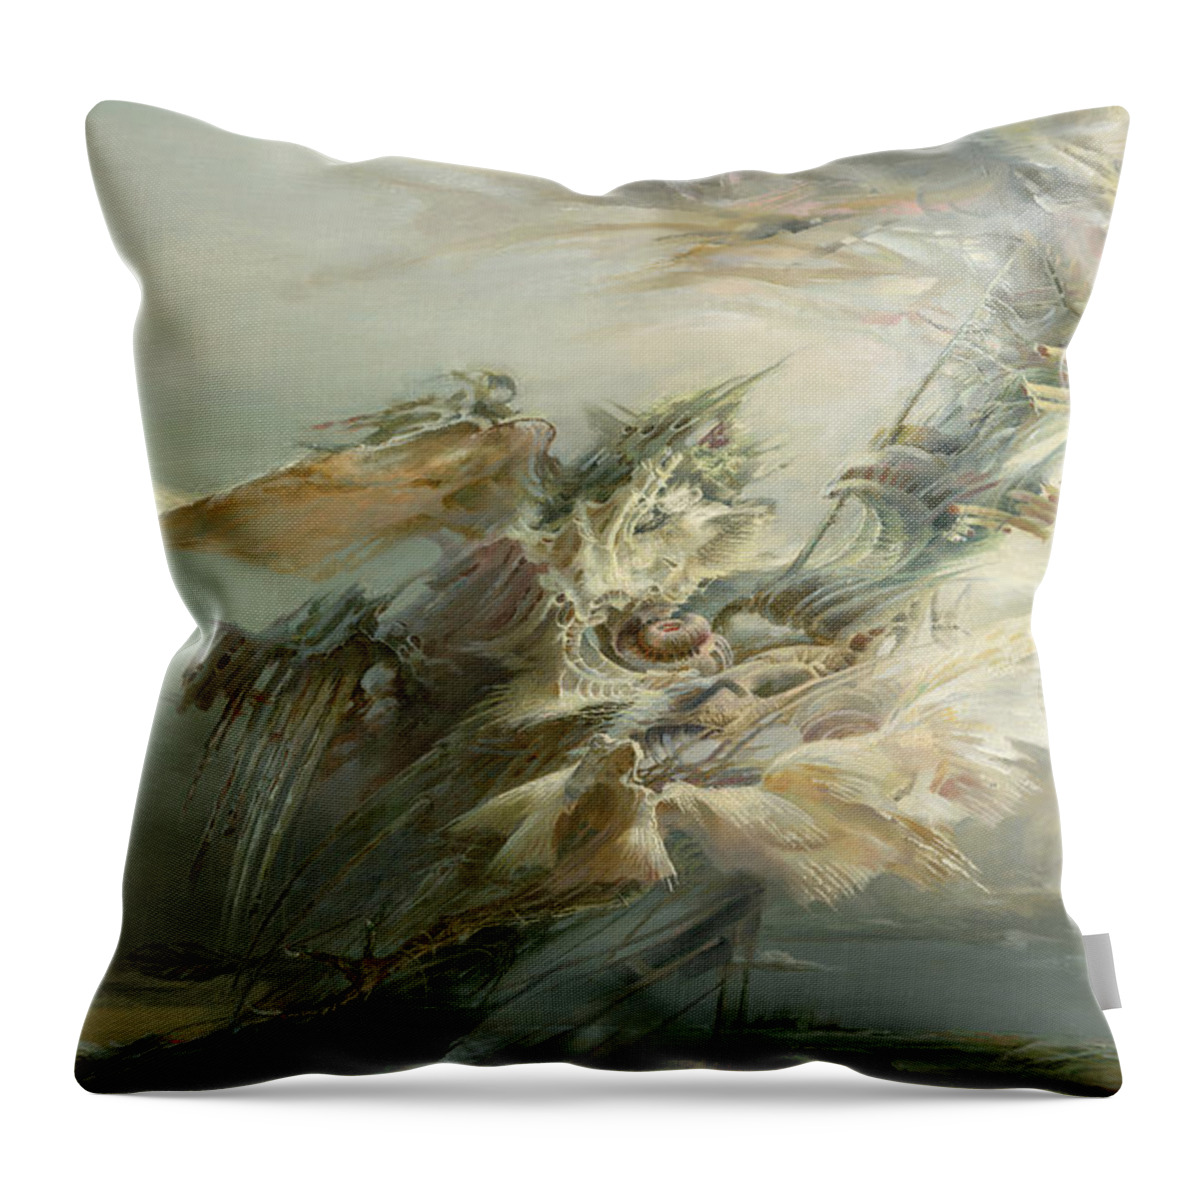 Sergey Gusarin Throw Pillow featuring the painting Takeoff by Sergey Gusarin